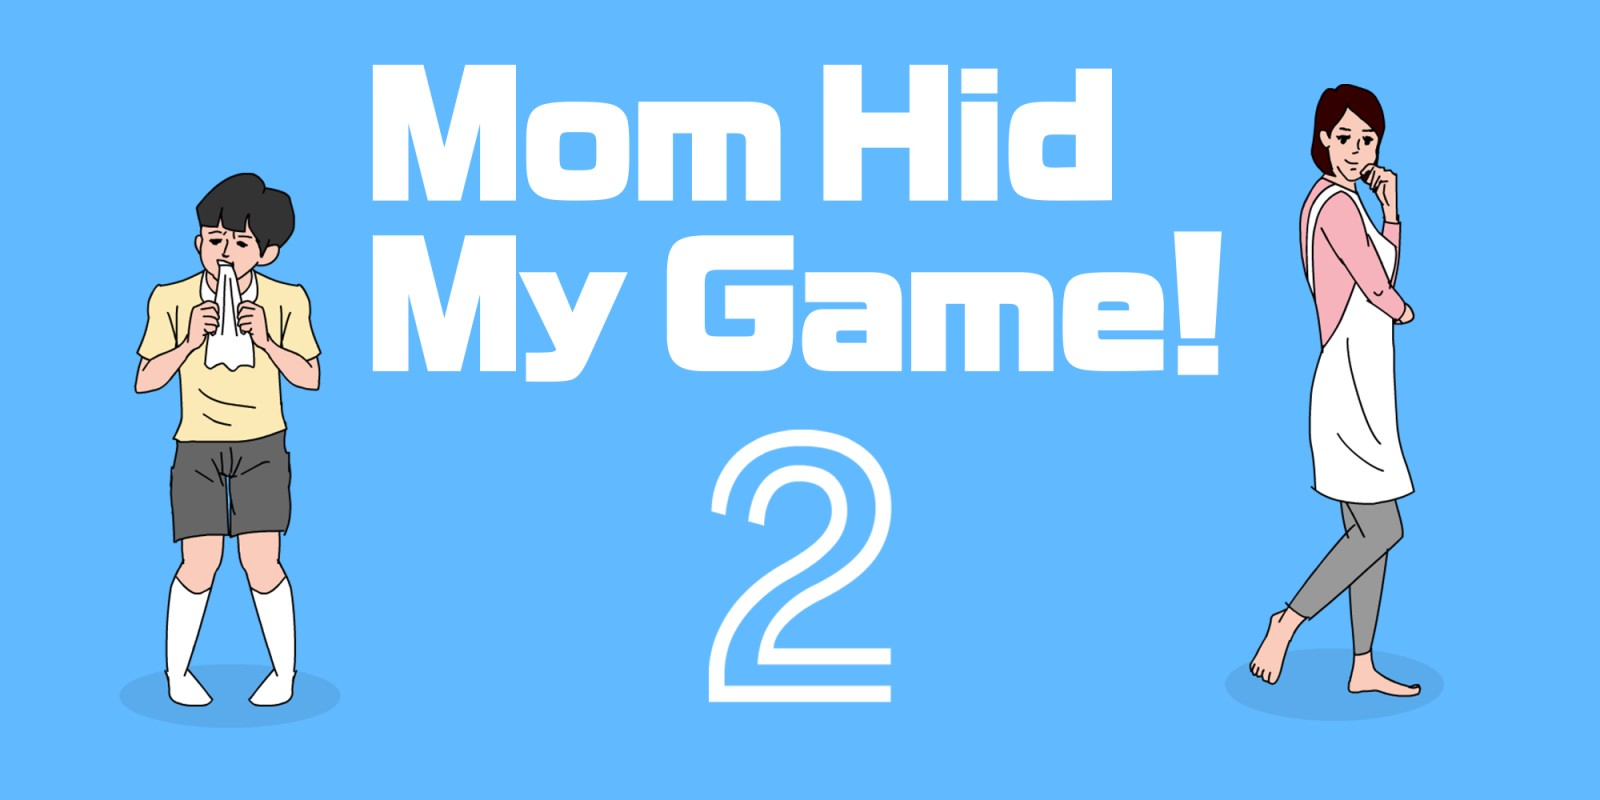 mom hid my game 2